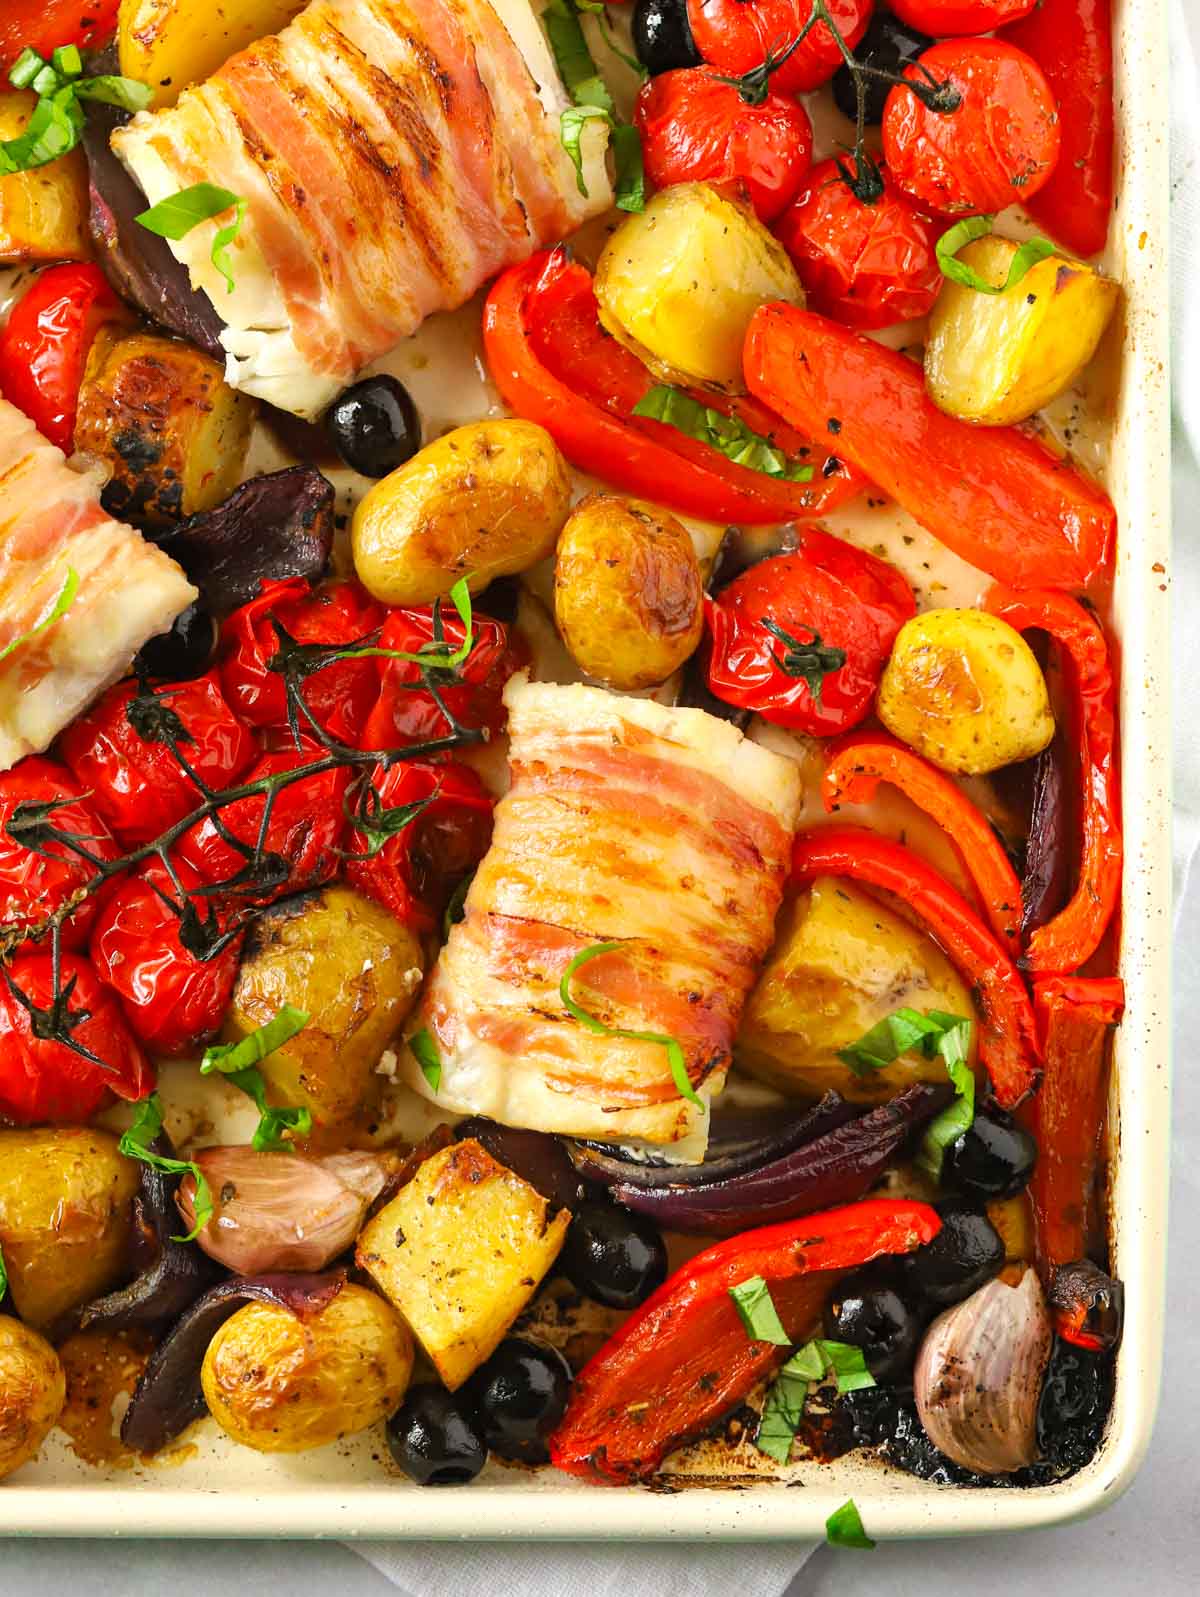 Baked cod pieces with Italian style vegetables on a tray.